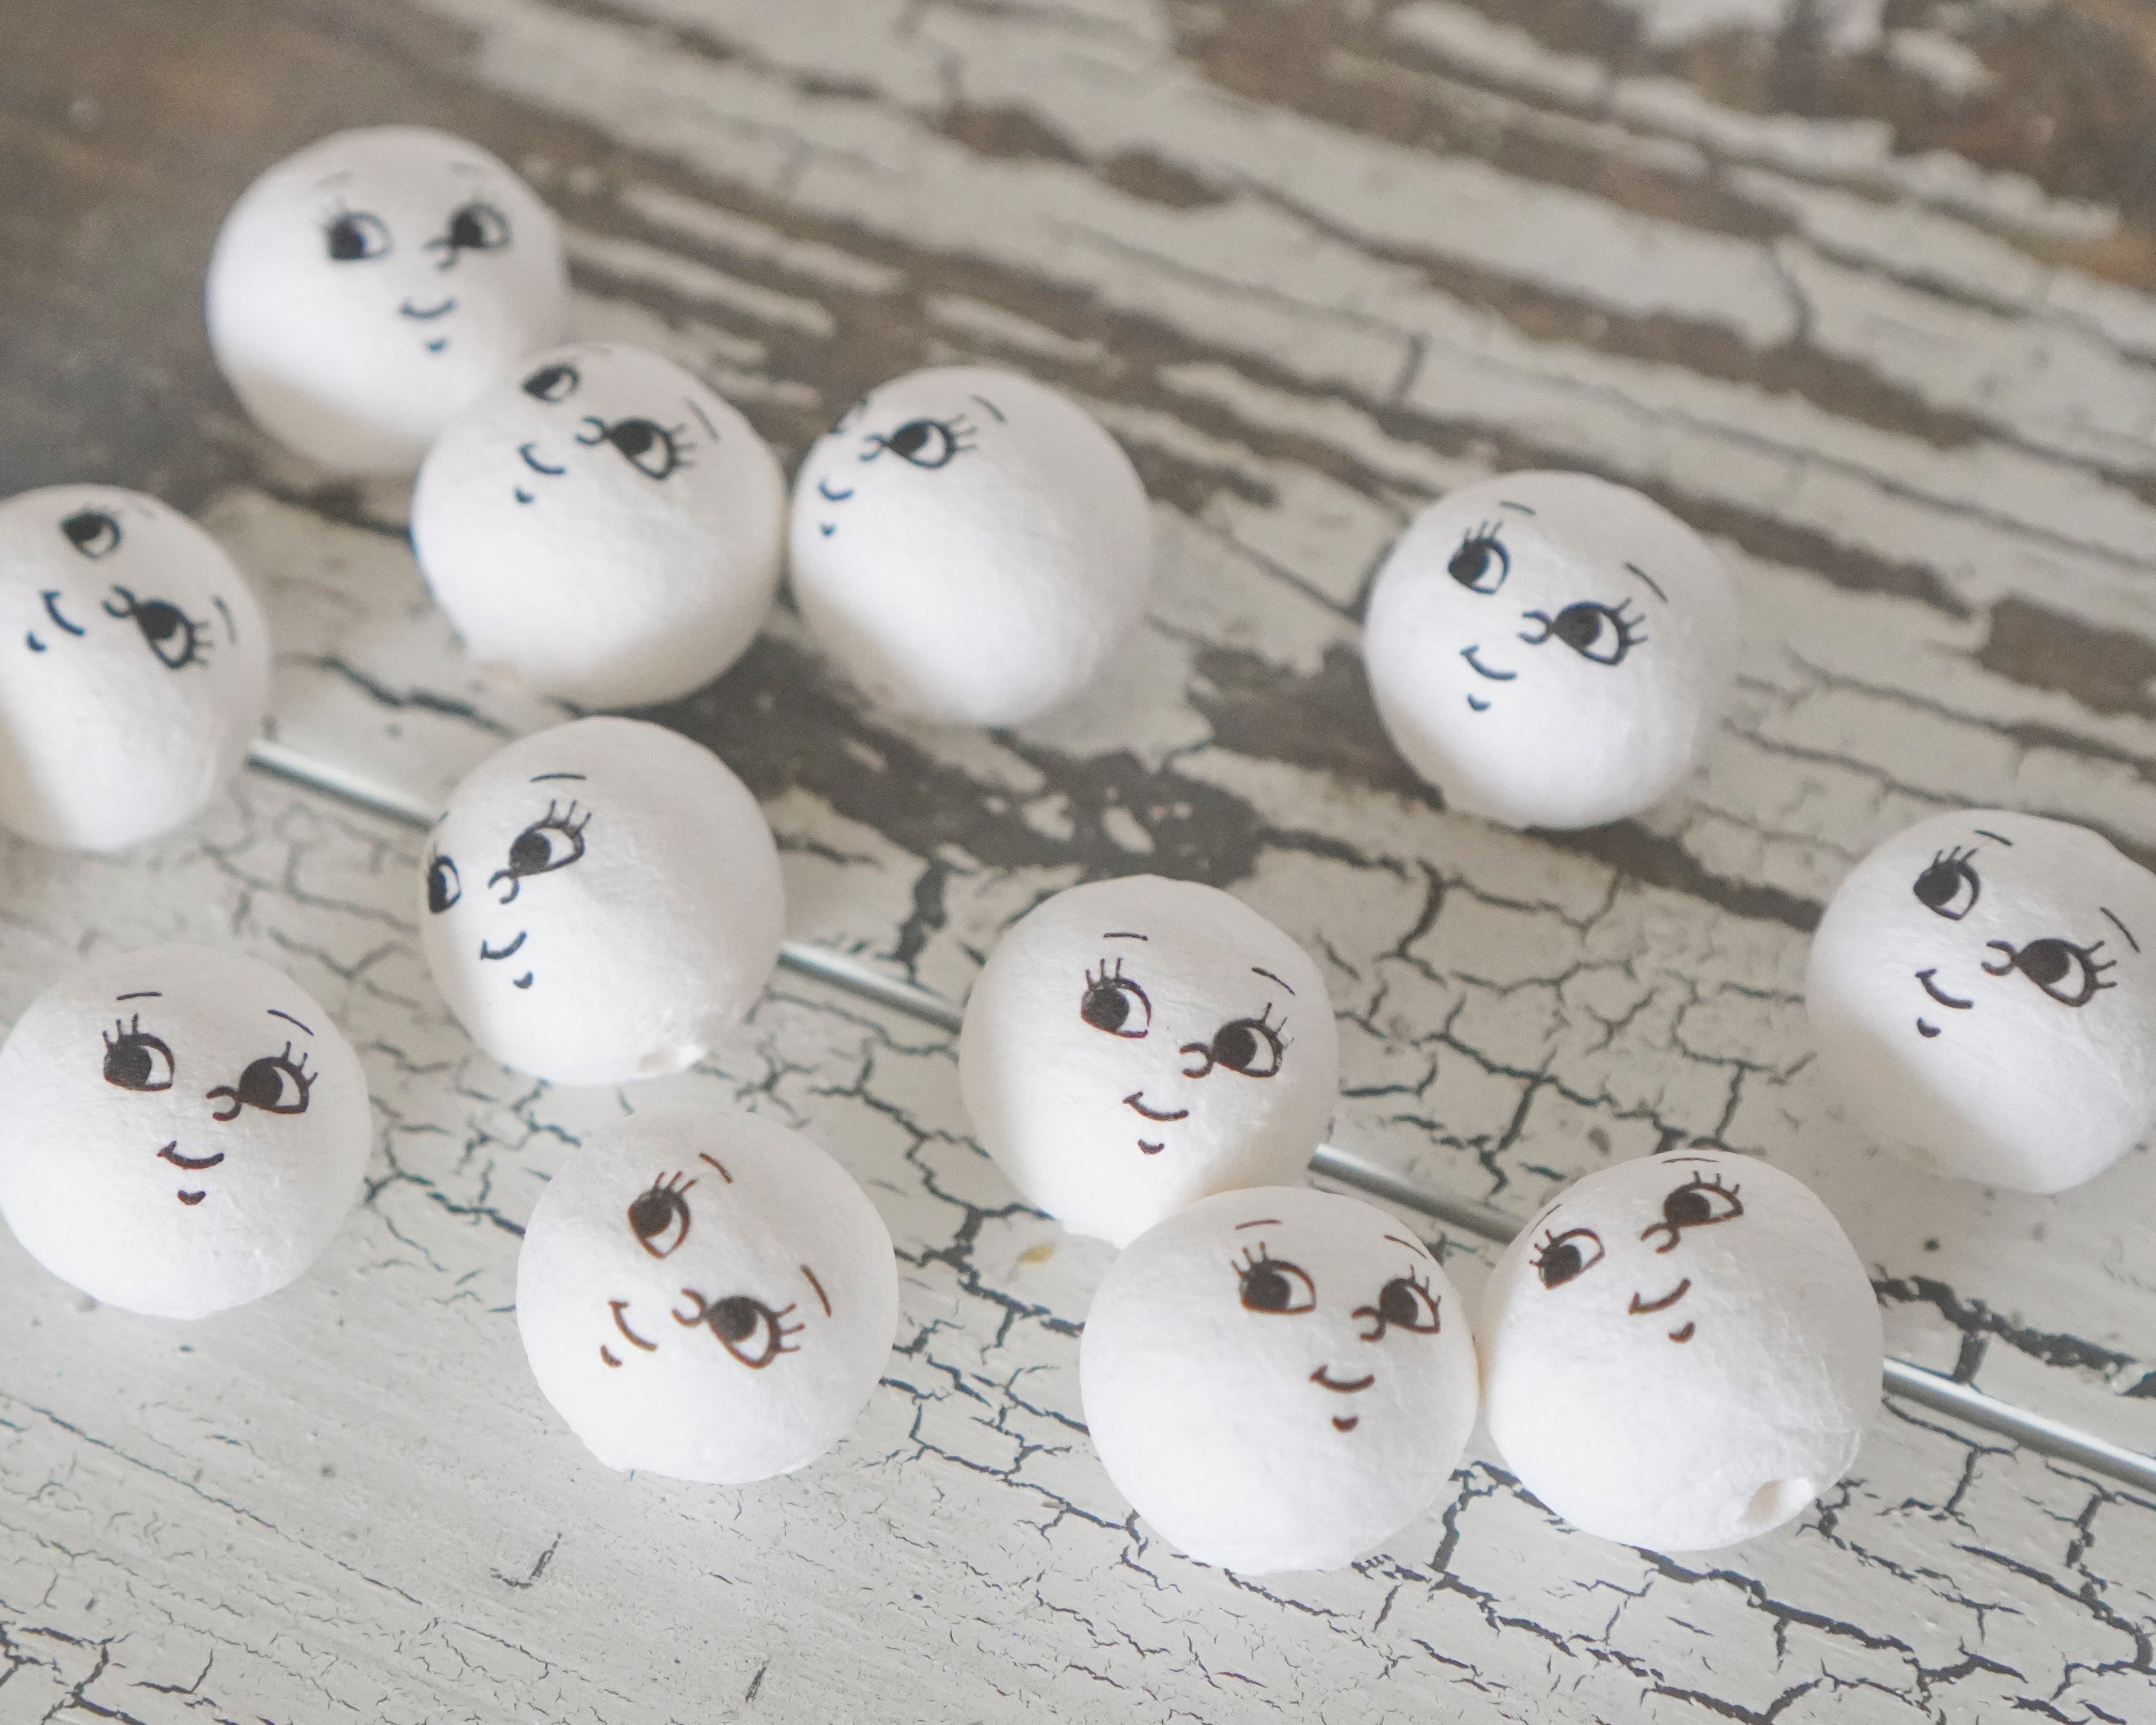 20mm Spun Cotton Heads: BRIGHT EYES - Vintage-Style Craft Heads with Faces, 12 Pcs.